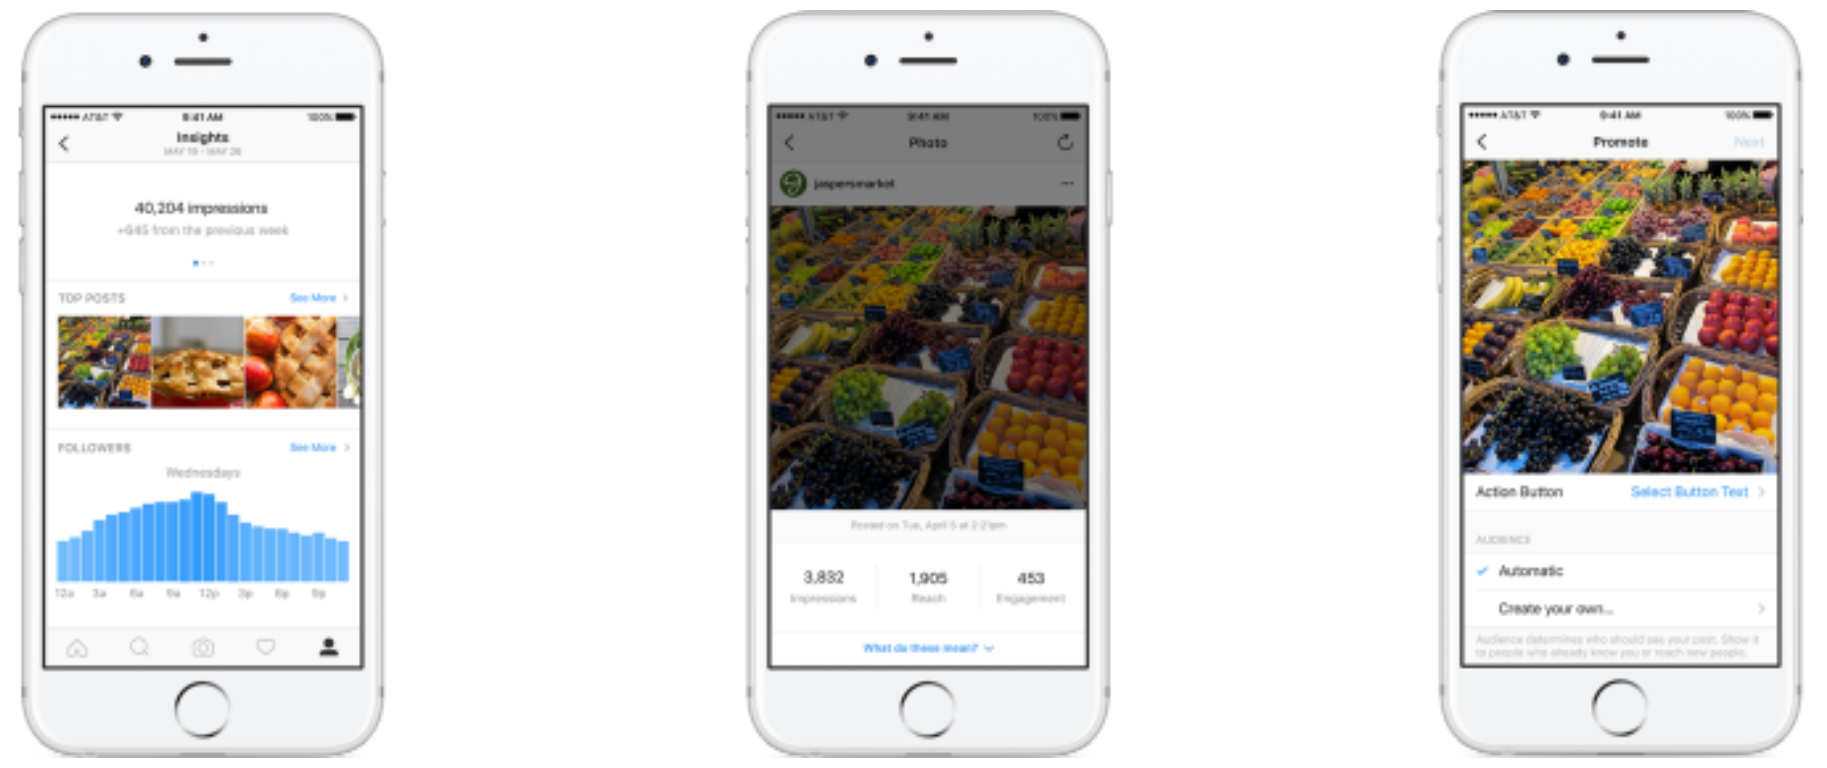 Instagram launching Business profiles to offer insights and promotion tools